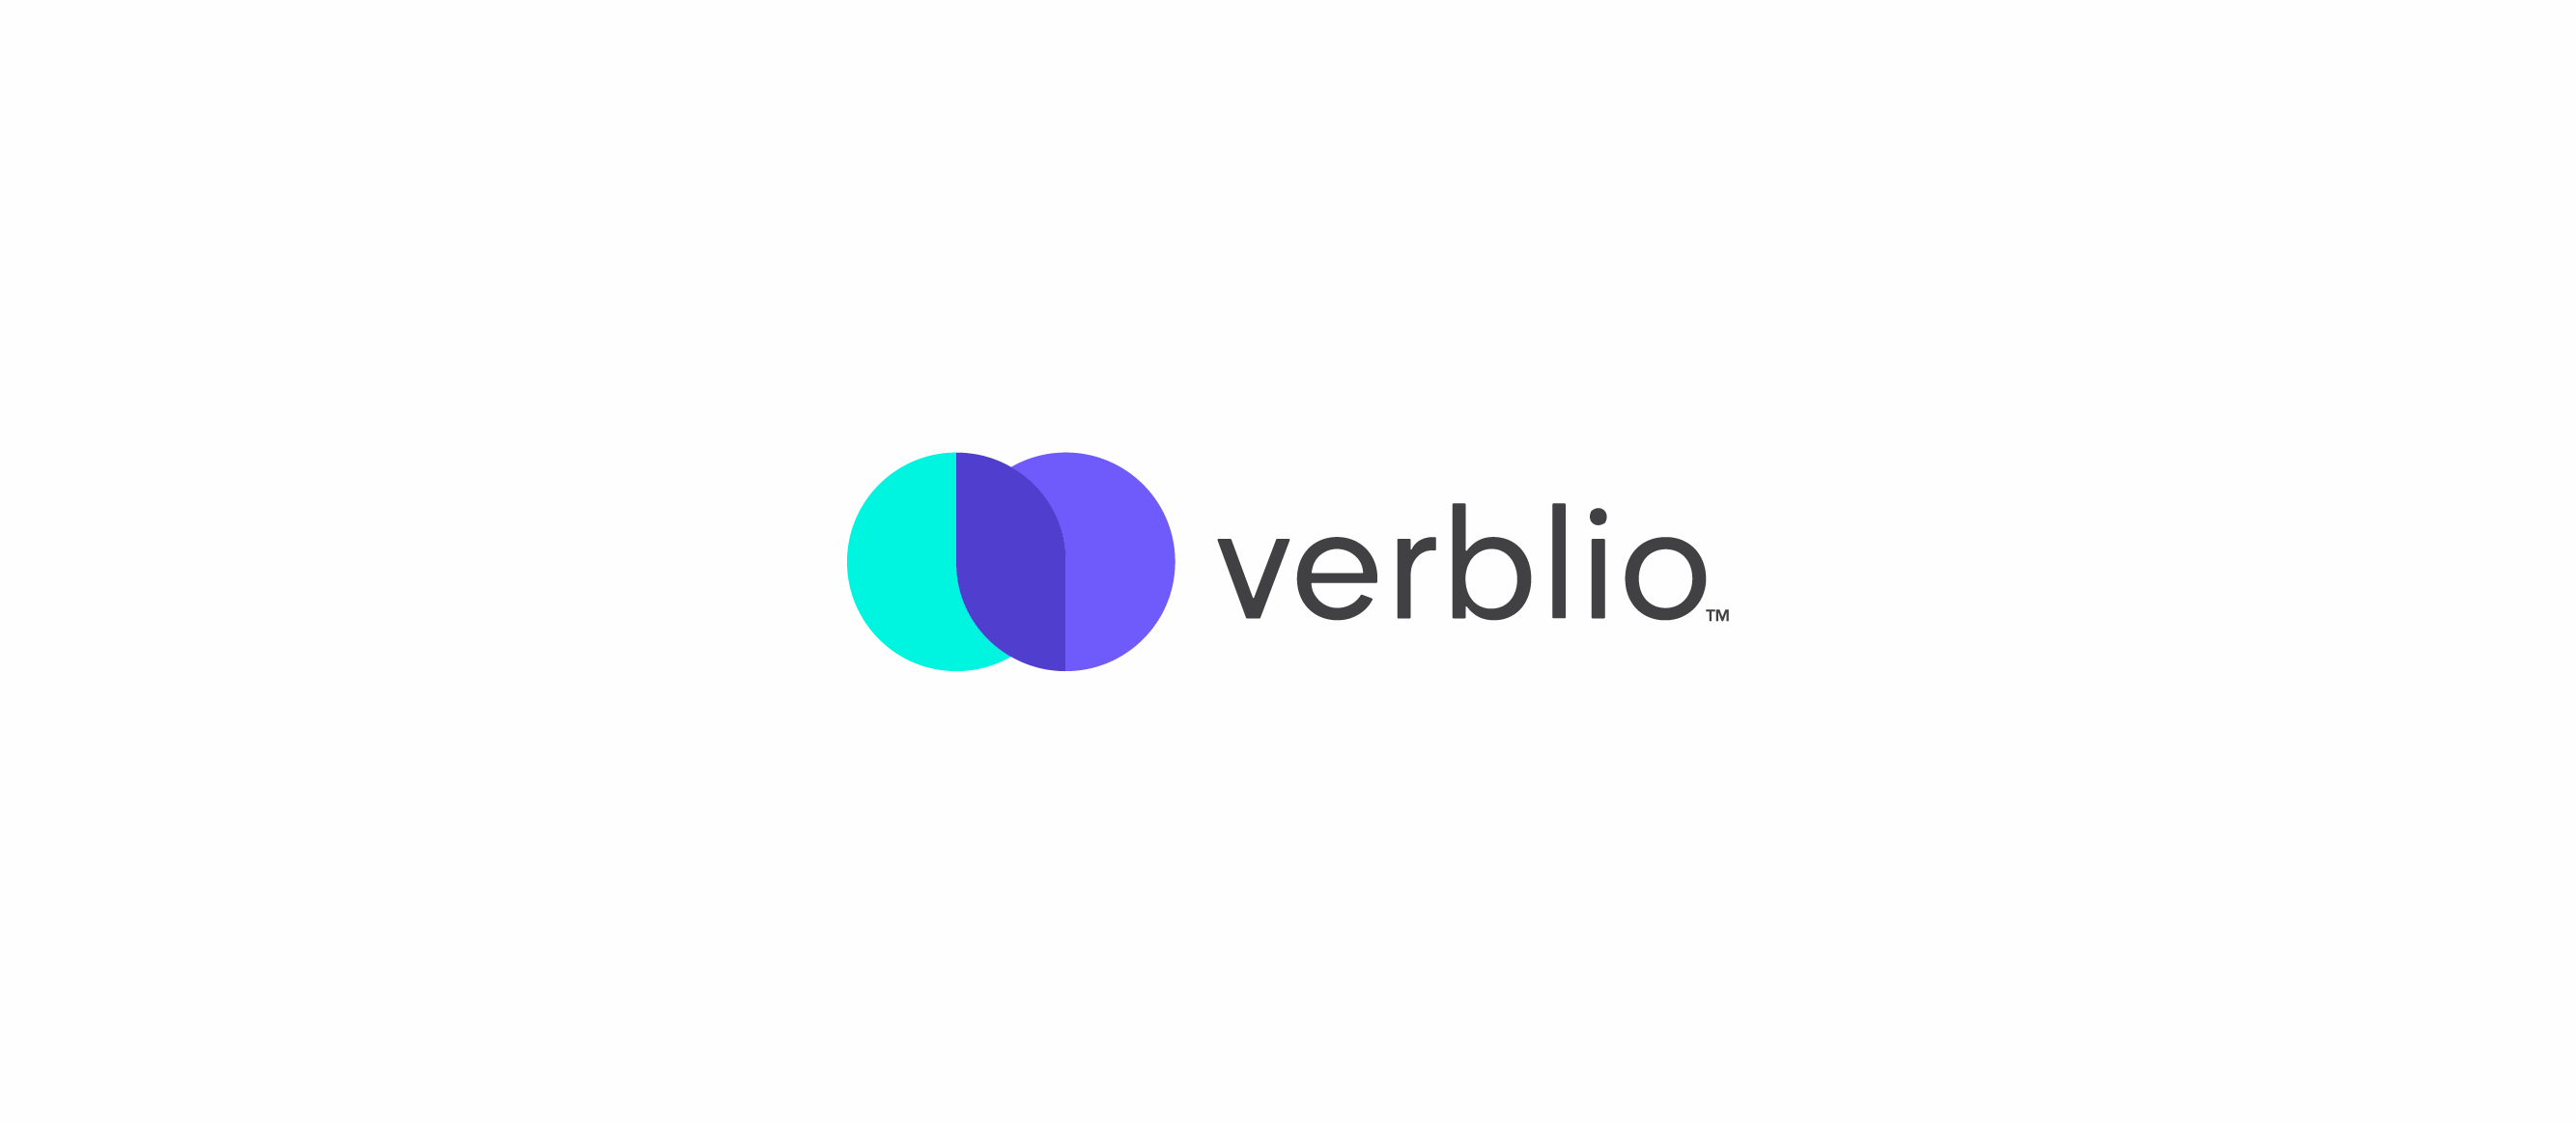 image of the verblio logo and name trademark on a light background